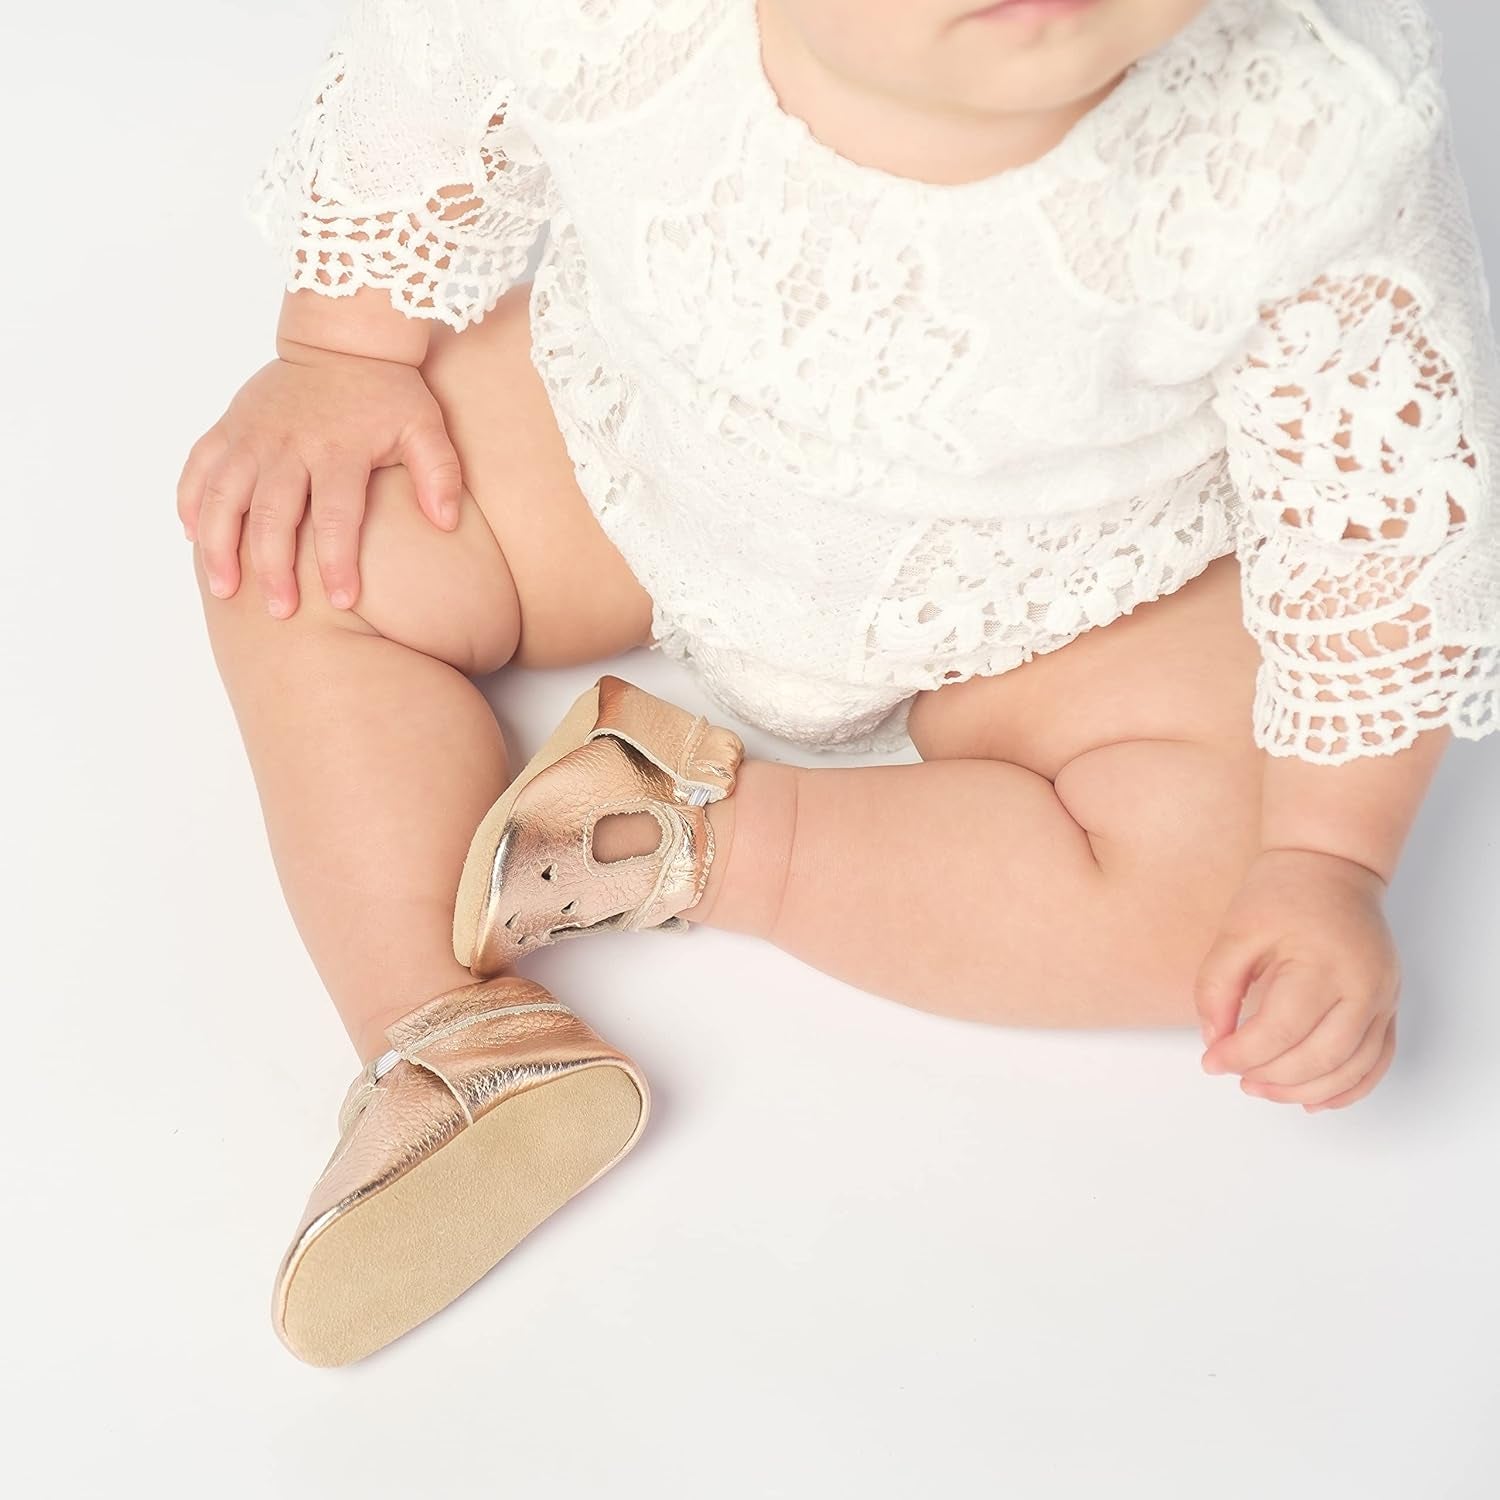 Mary Jane Moccasins - Genuine Leather Soft Sole Baby Girl Shoes for Newborns, Infants, Babies, and Toddlers